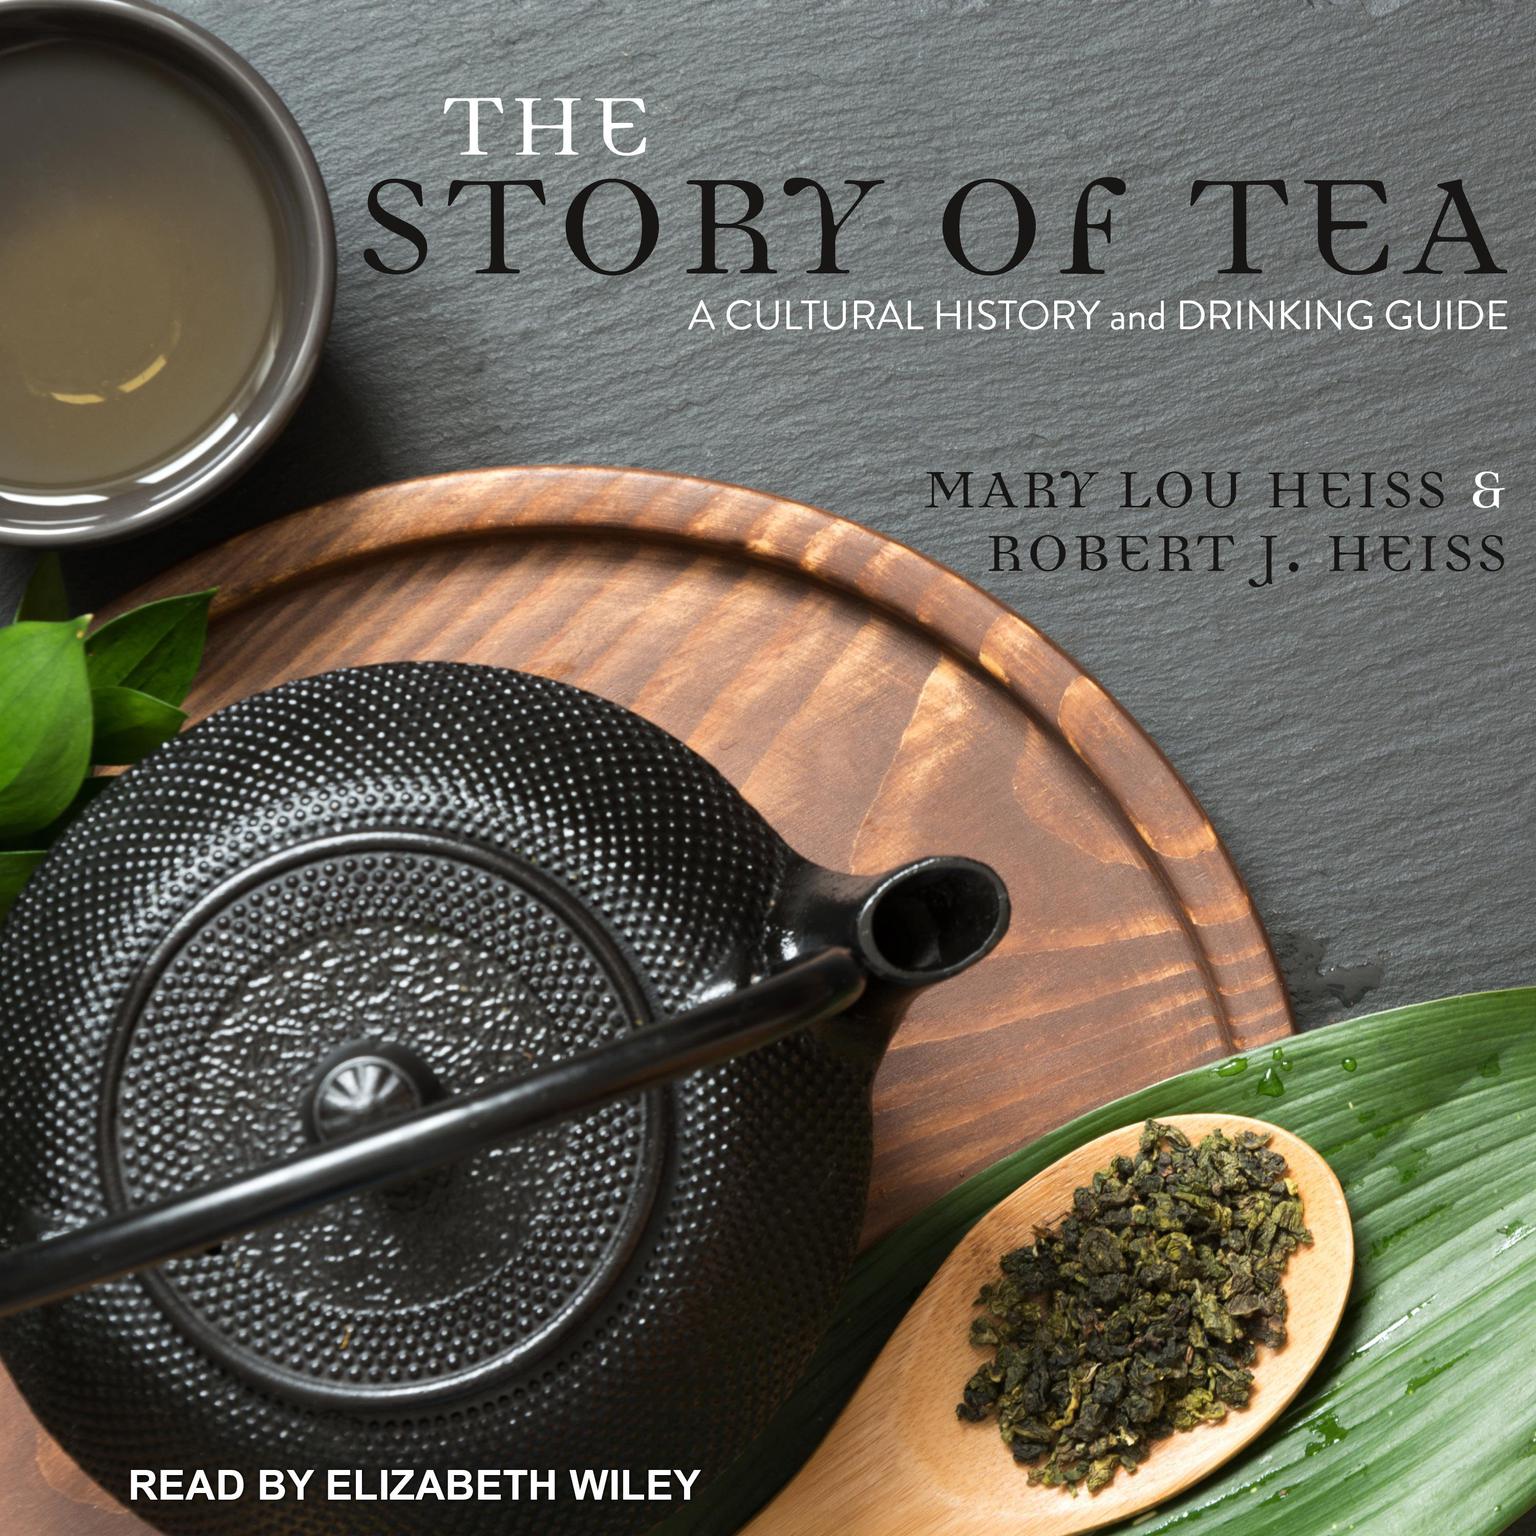 The Story of Tea: A Cultural History and Drinking Guide Audiobook, by Mary Lou Heiss